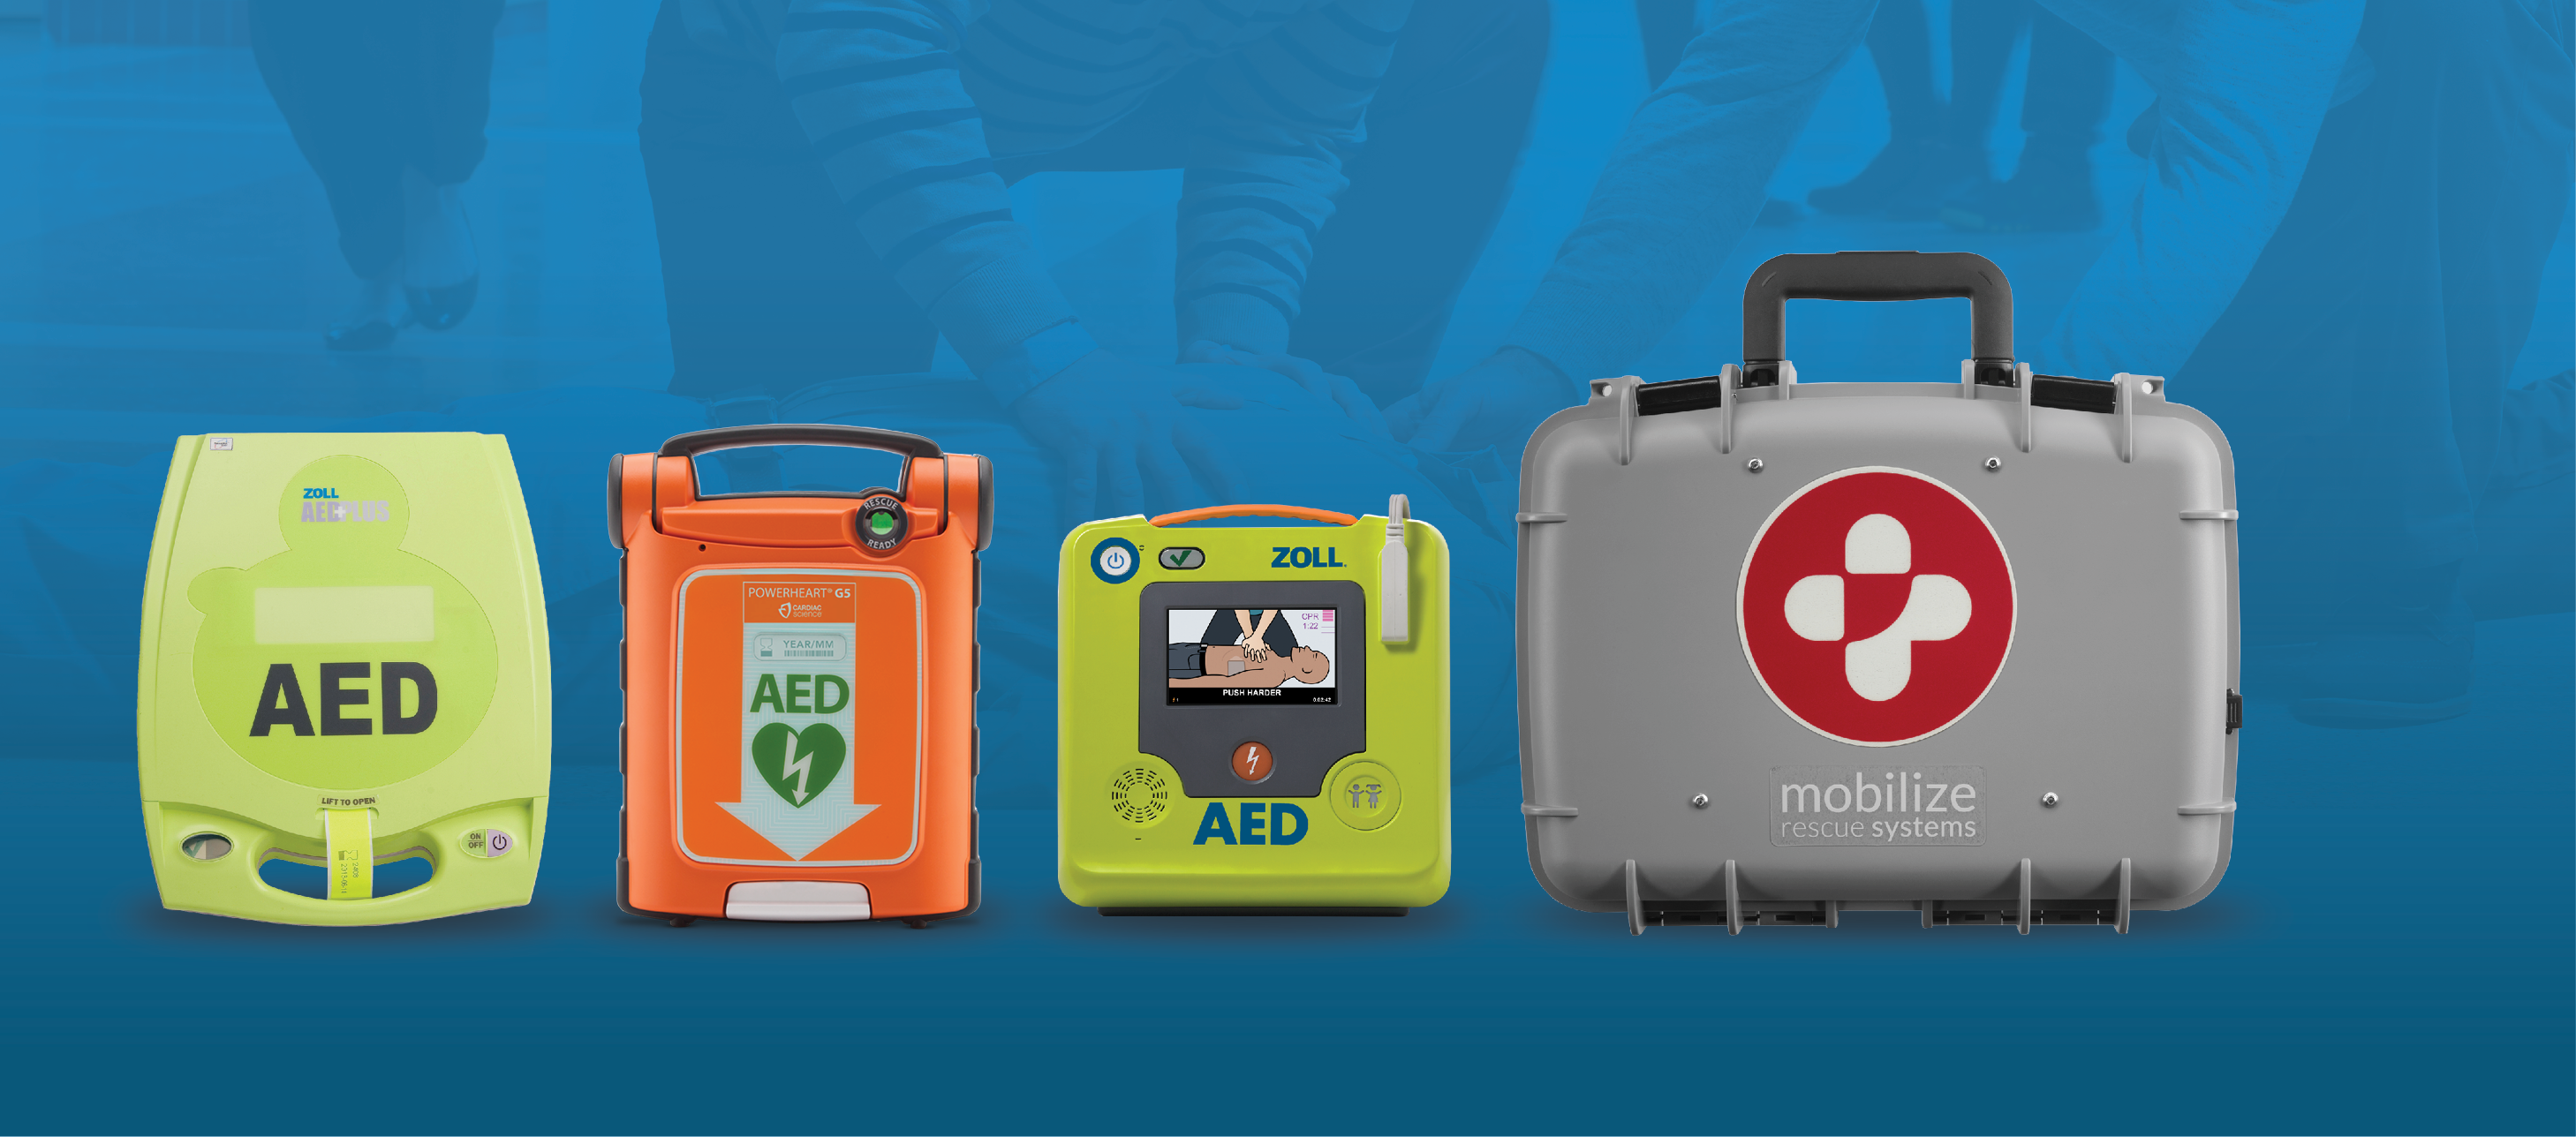 ZOLL AEDs and rescue systems help save lives